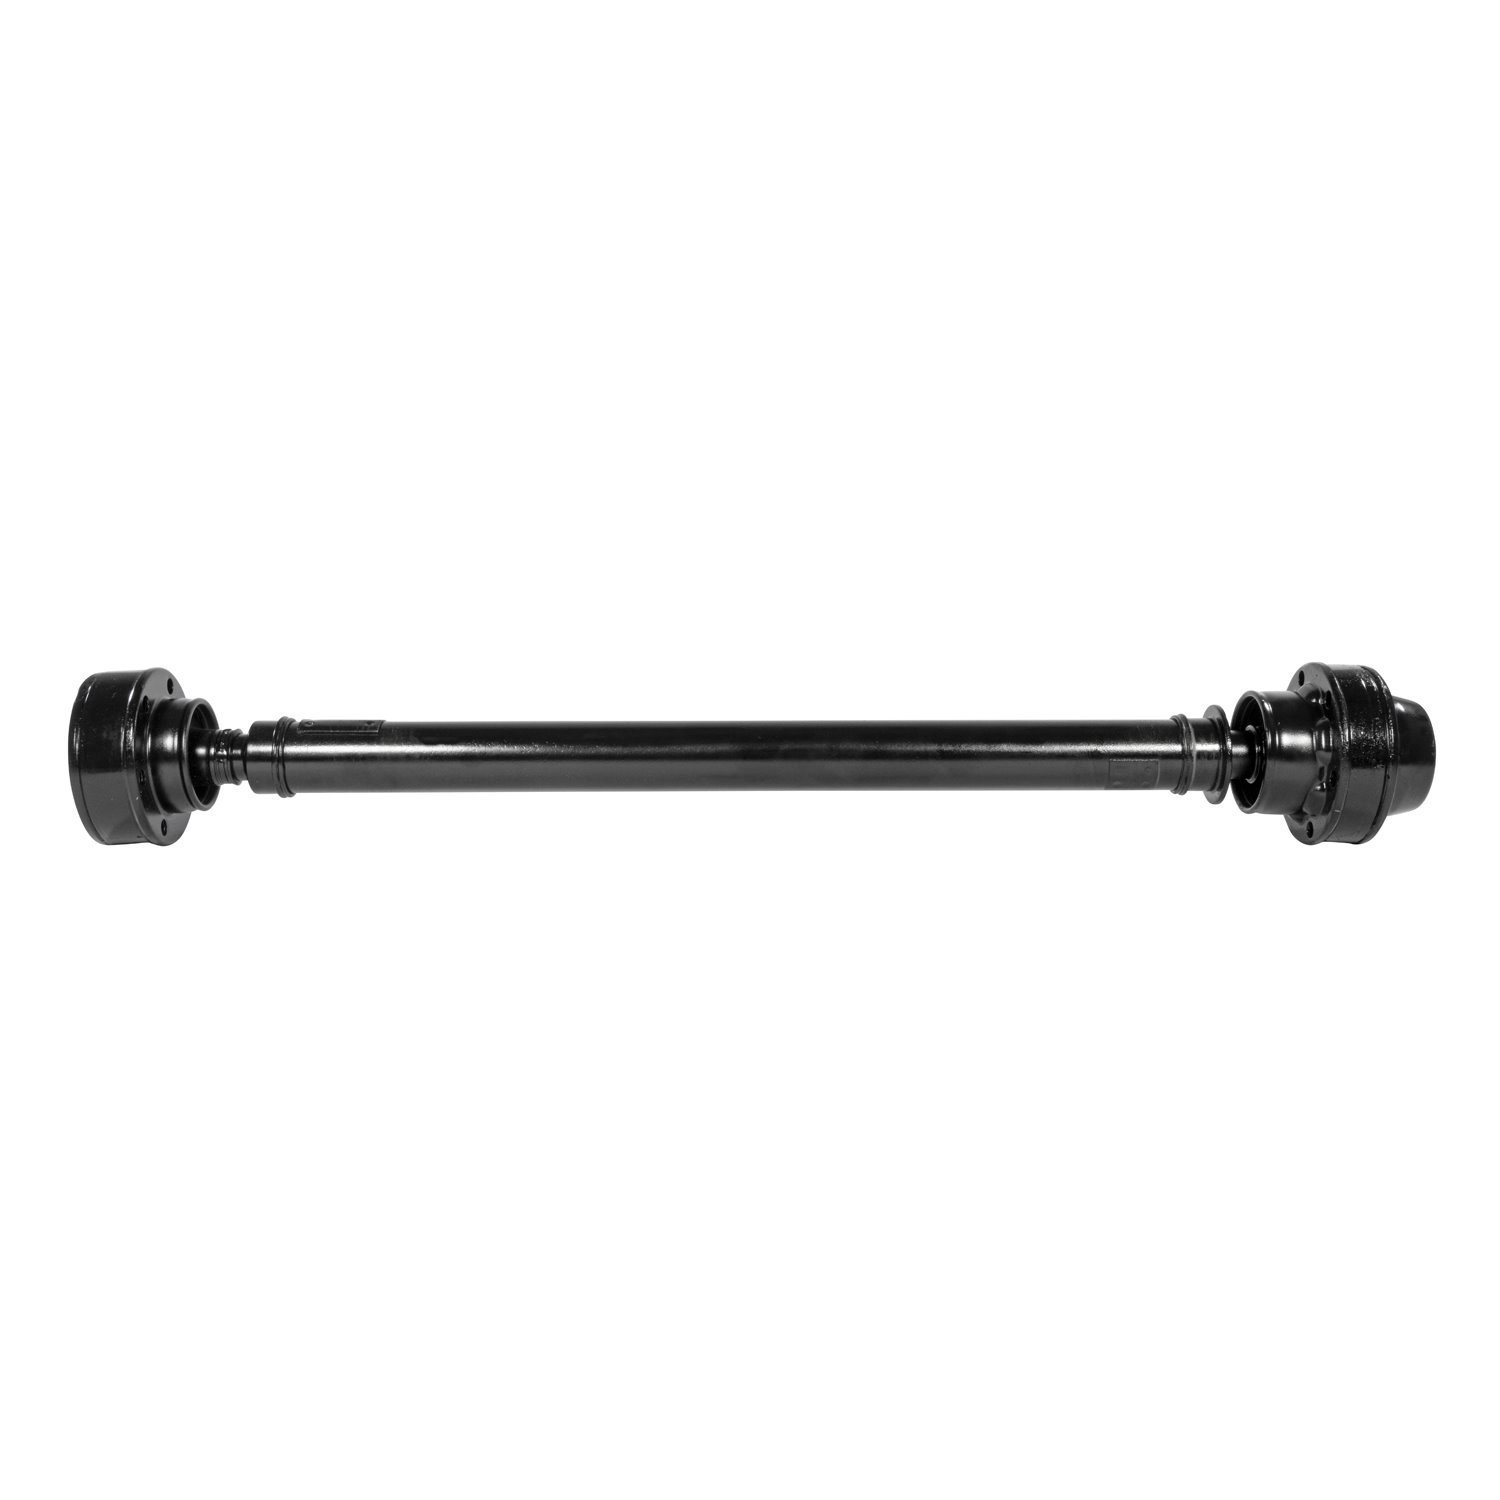 USA Standard 44623 Front Driveshaft, For Ford, Lincoln,